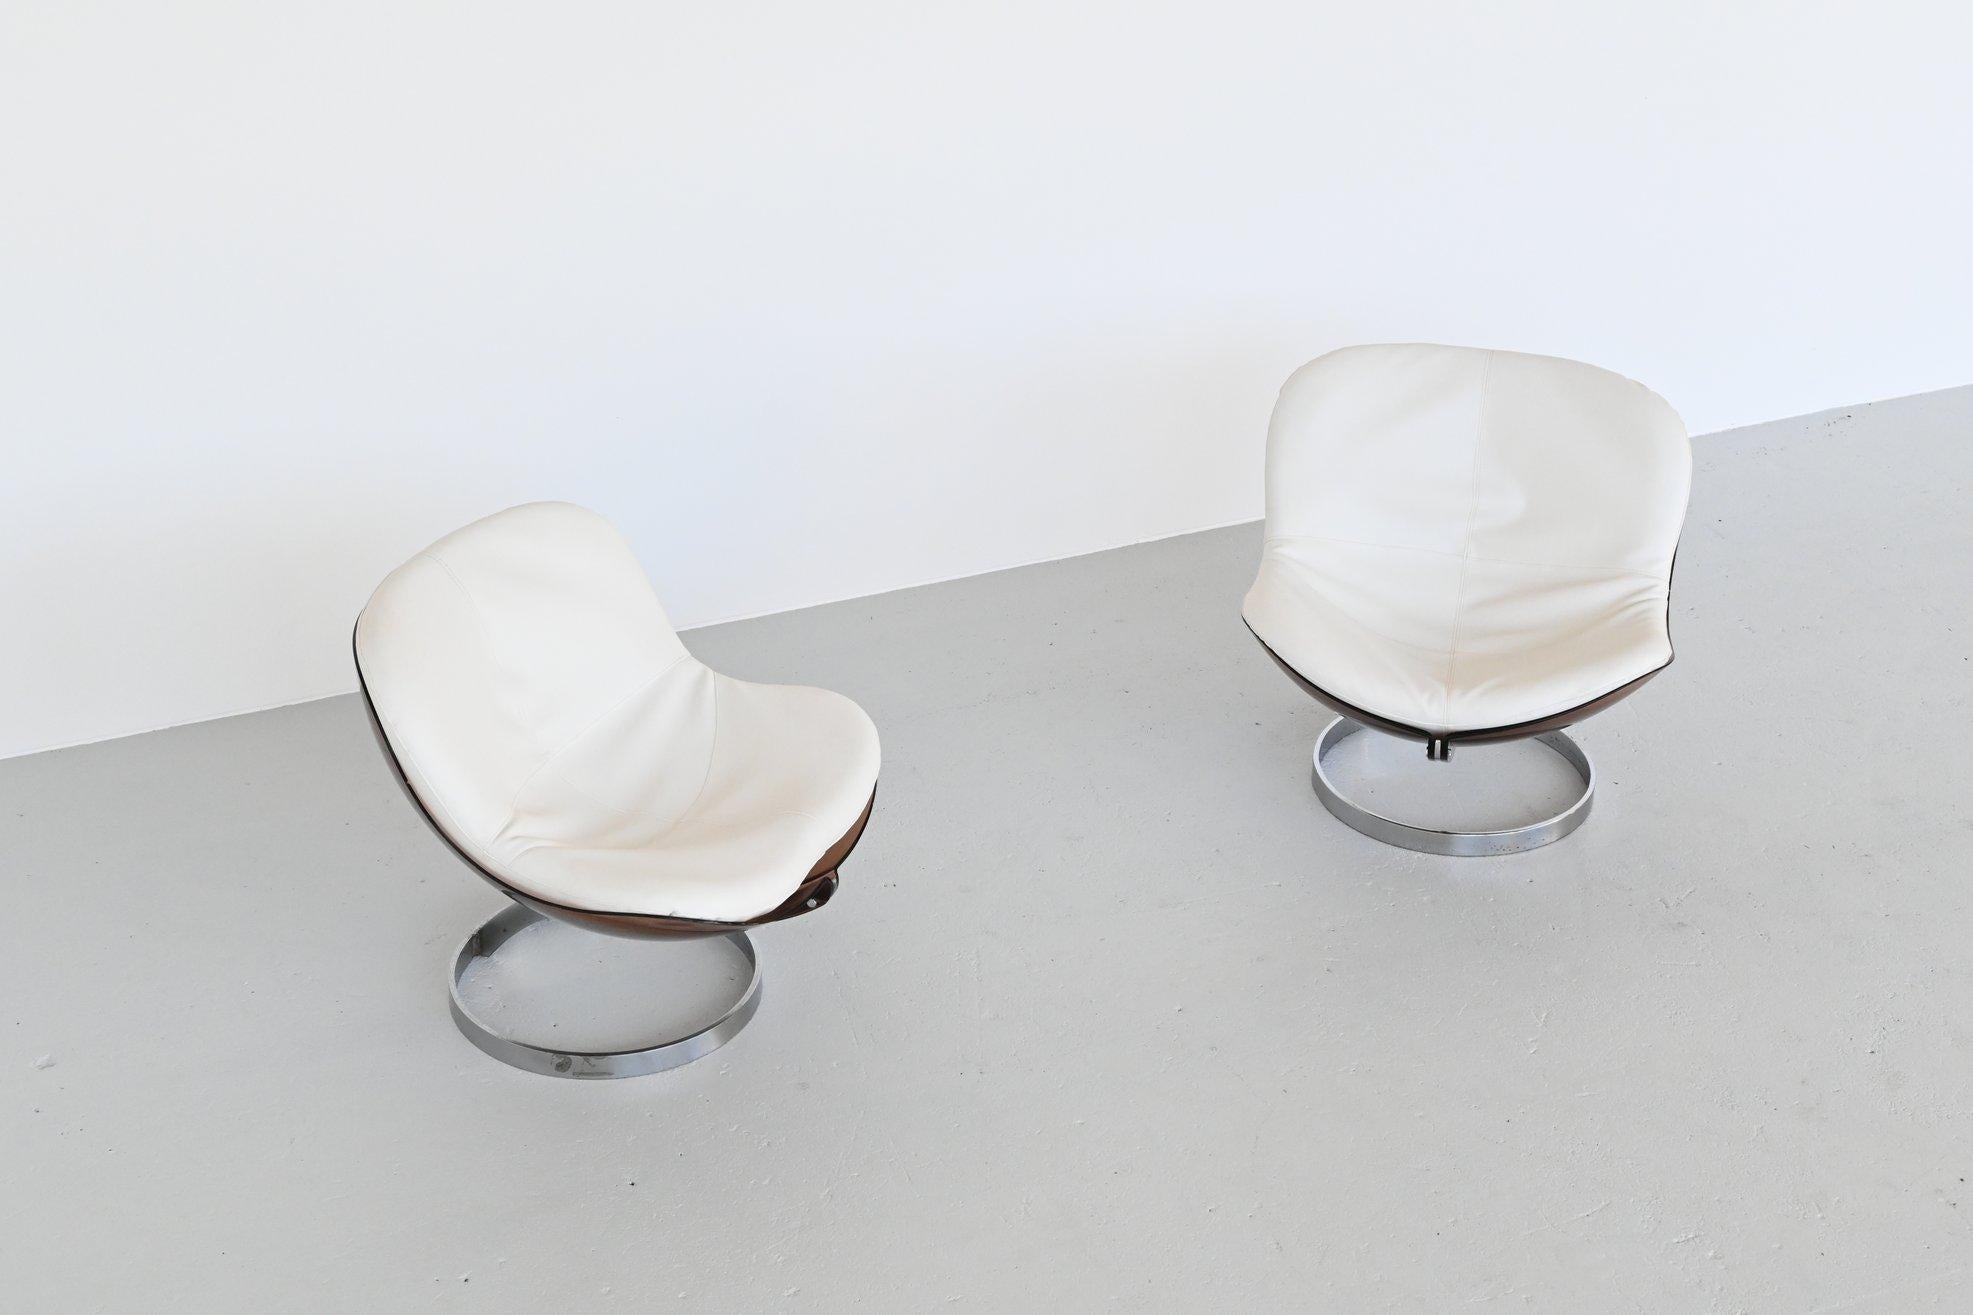 Plexiglass Boris Tabacoff Sphere lounge chairs Mobilier Modulair Moderne, France, 1971